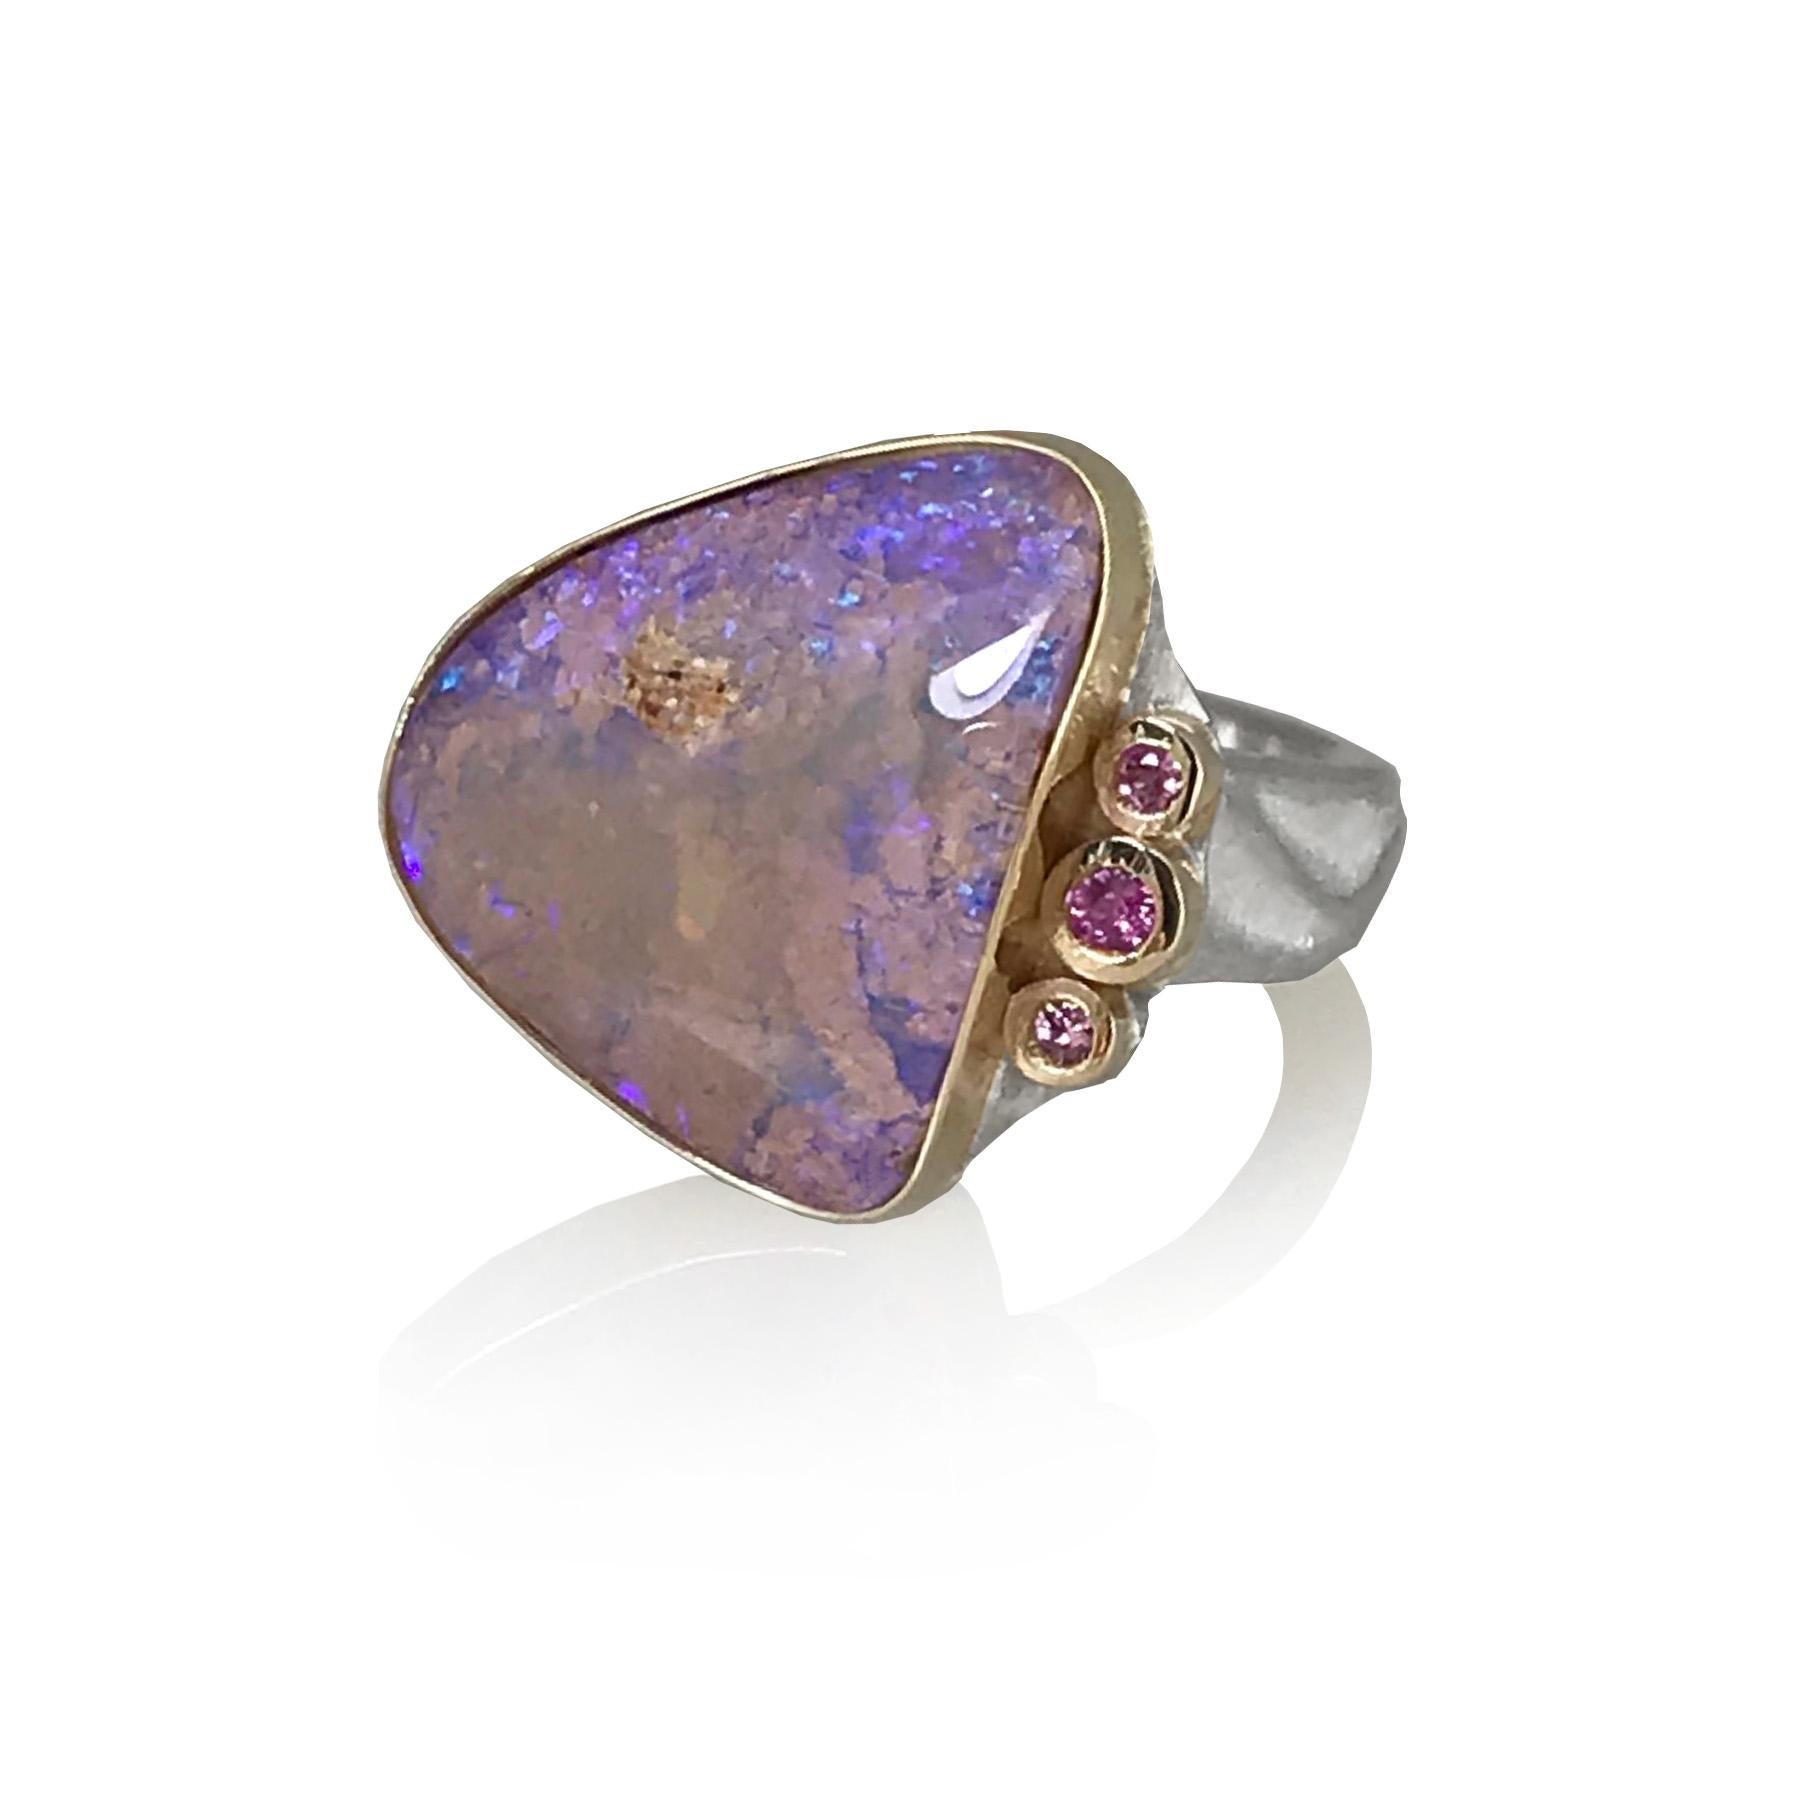 Named after the famous pink lakes of Coloradas, Mexico, K.Mita's Coloradas Ring features a 6.45 Carat Pink Boulder Opal with multiple layers of color. Staring into the ring is like staring into the depths of the ocean. The modern ring, which has a